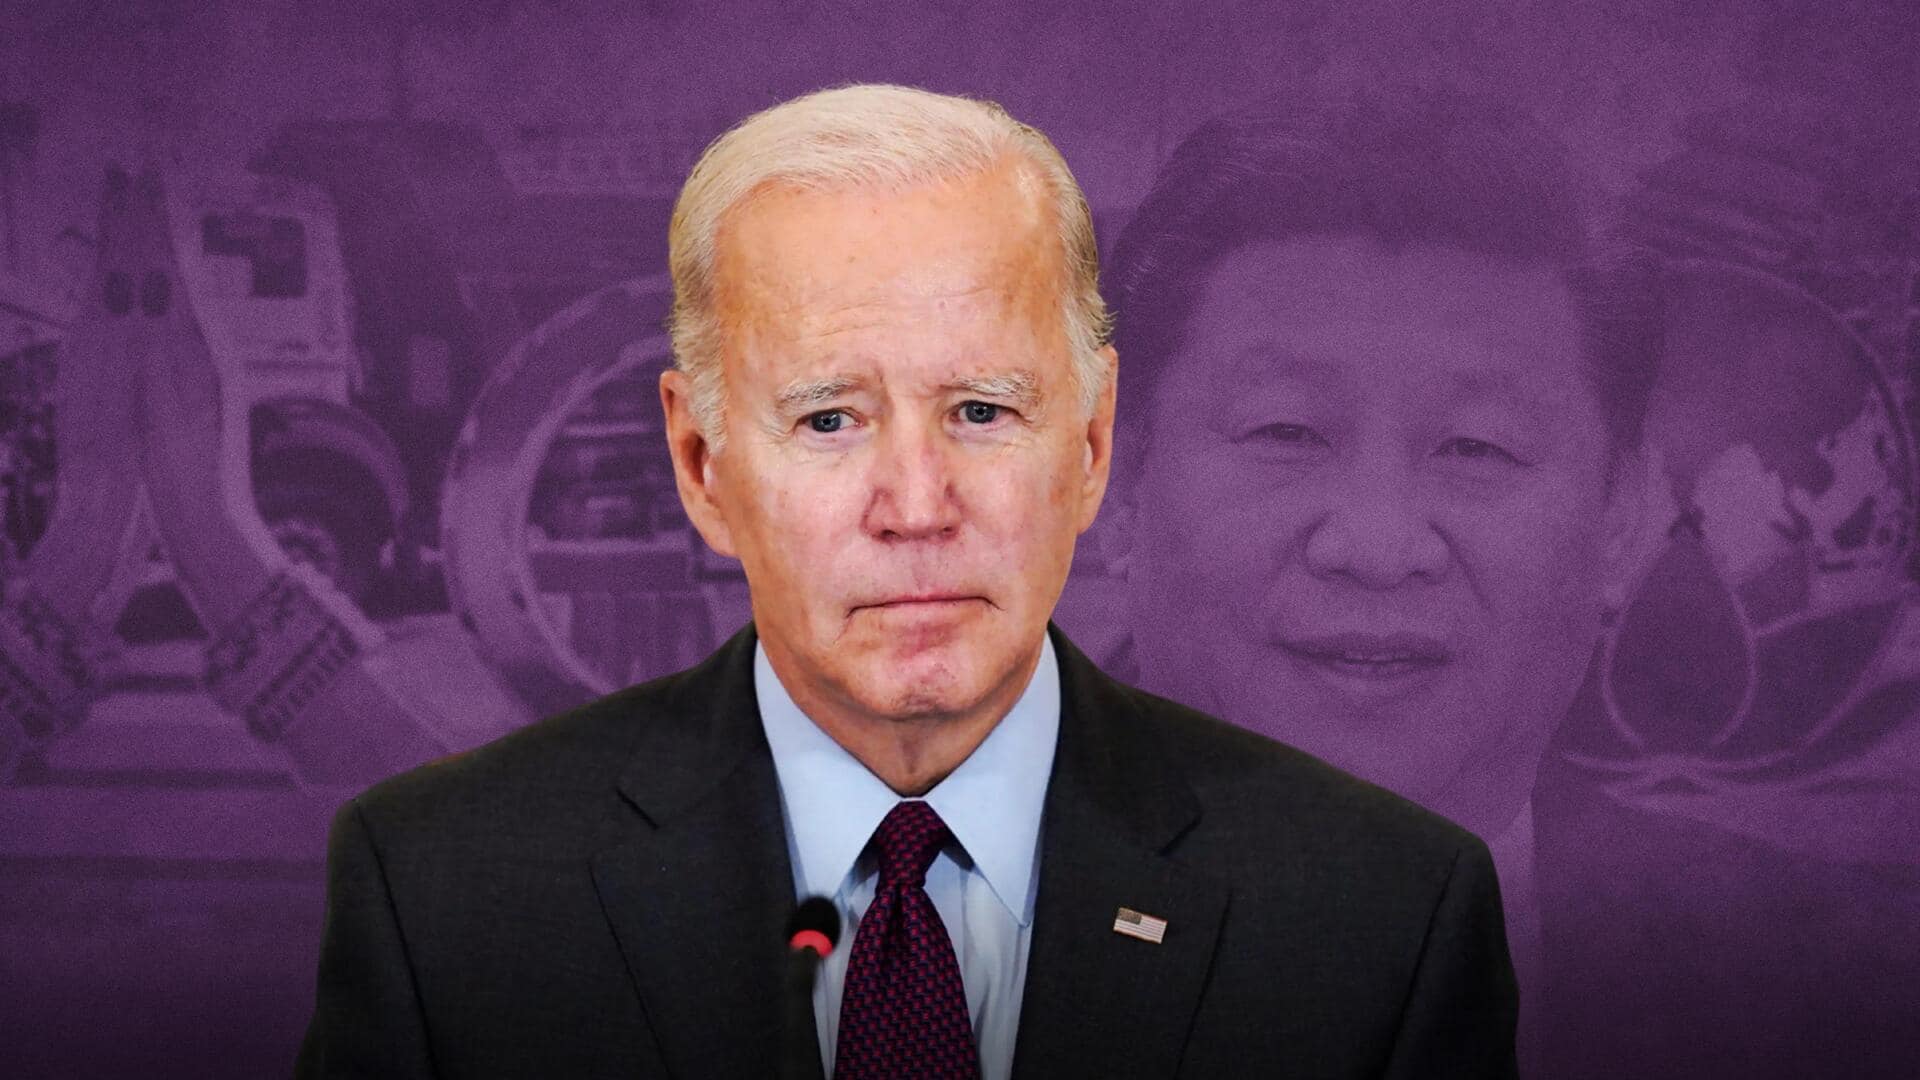 Biden 'disappointed' by Xi's reported G20 Summit absence